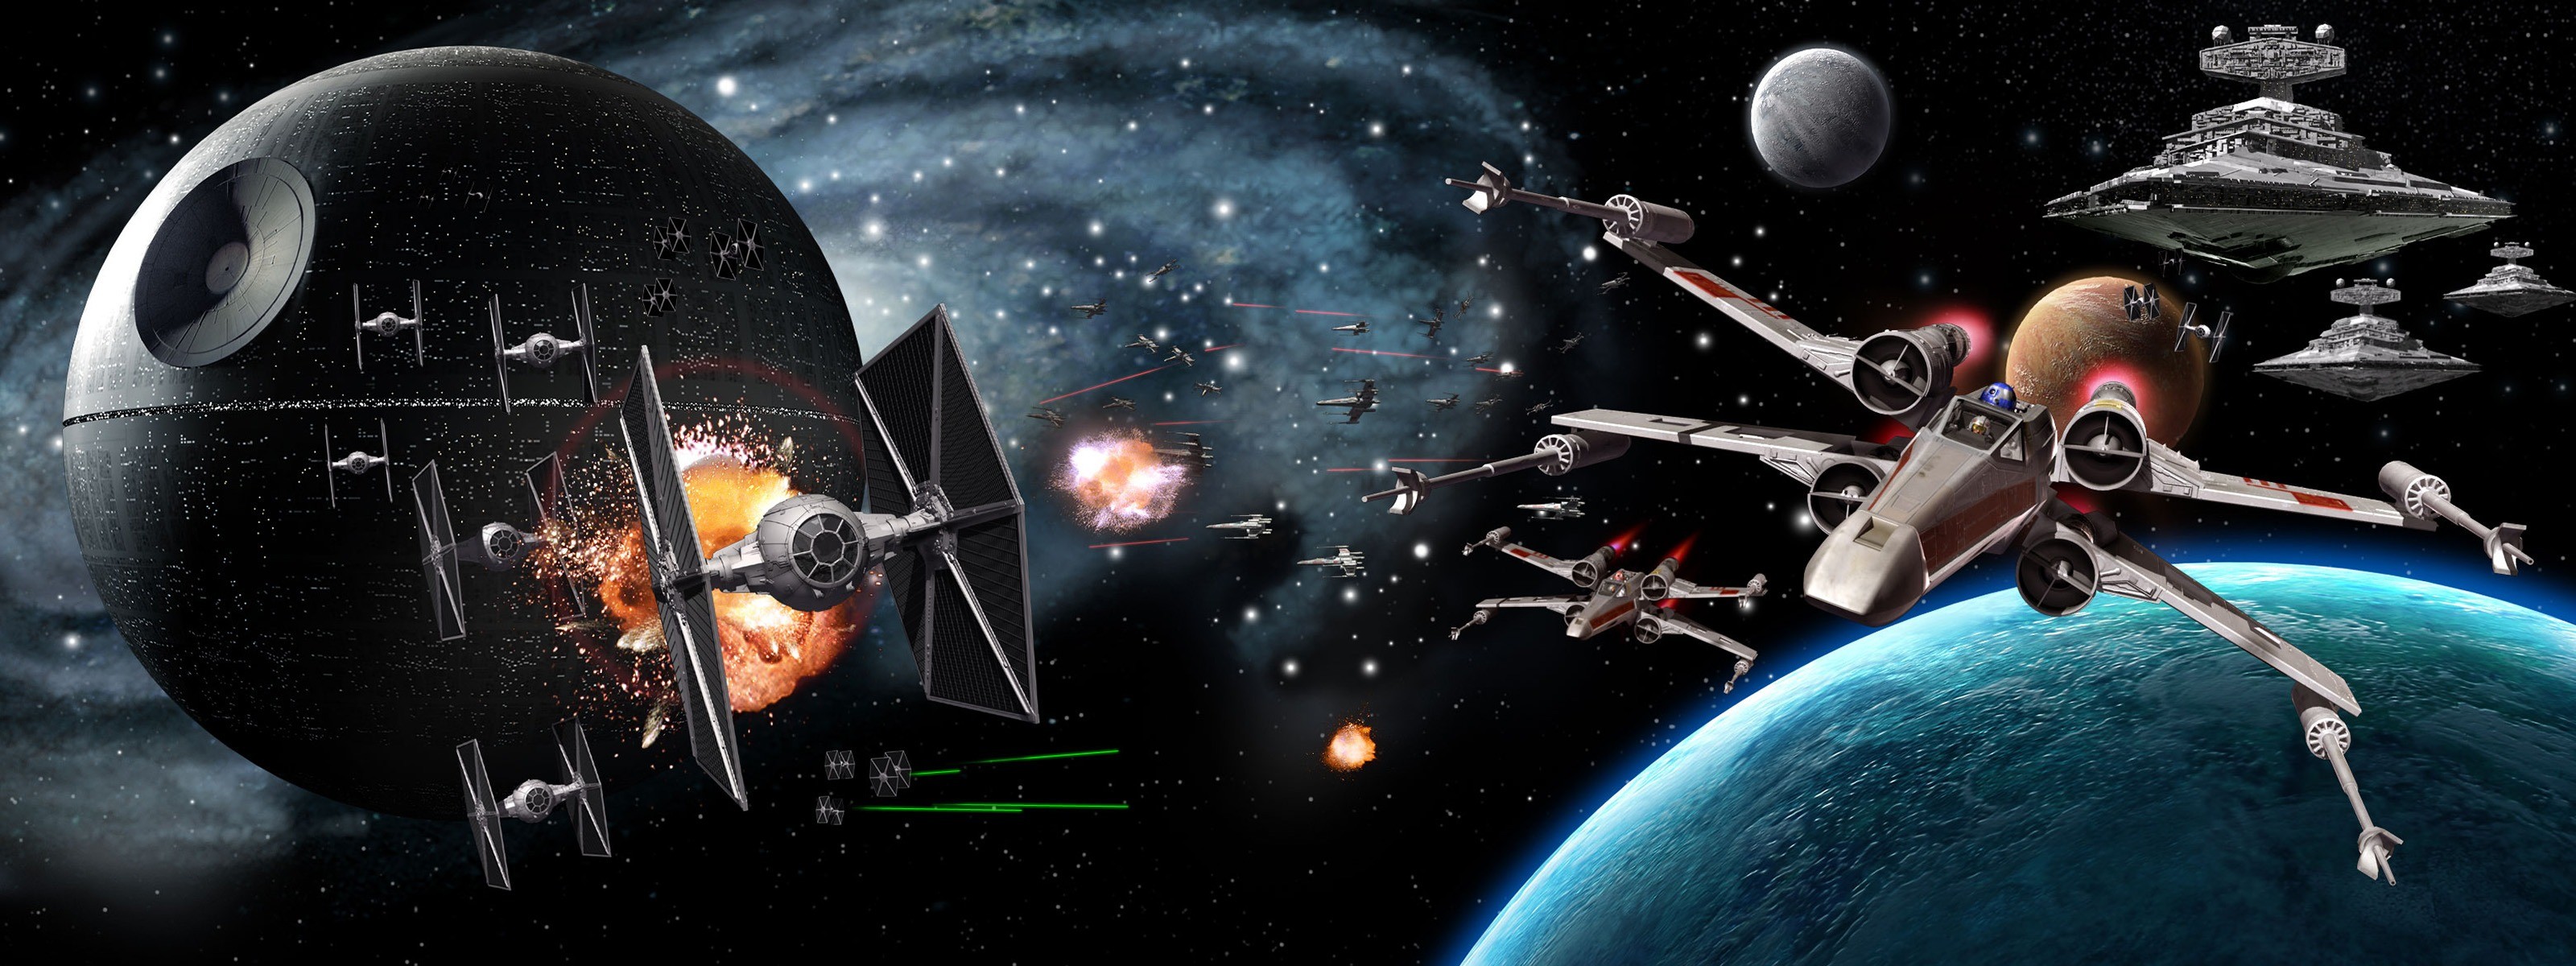 How the Rebel Alliance Defeats the Galactic Empire from Star Wars